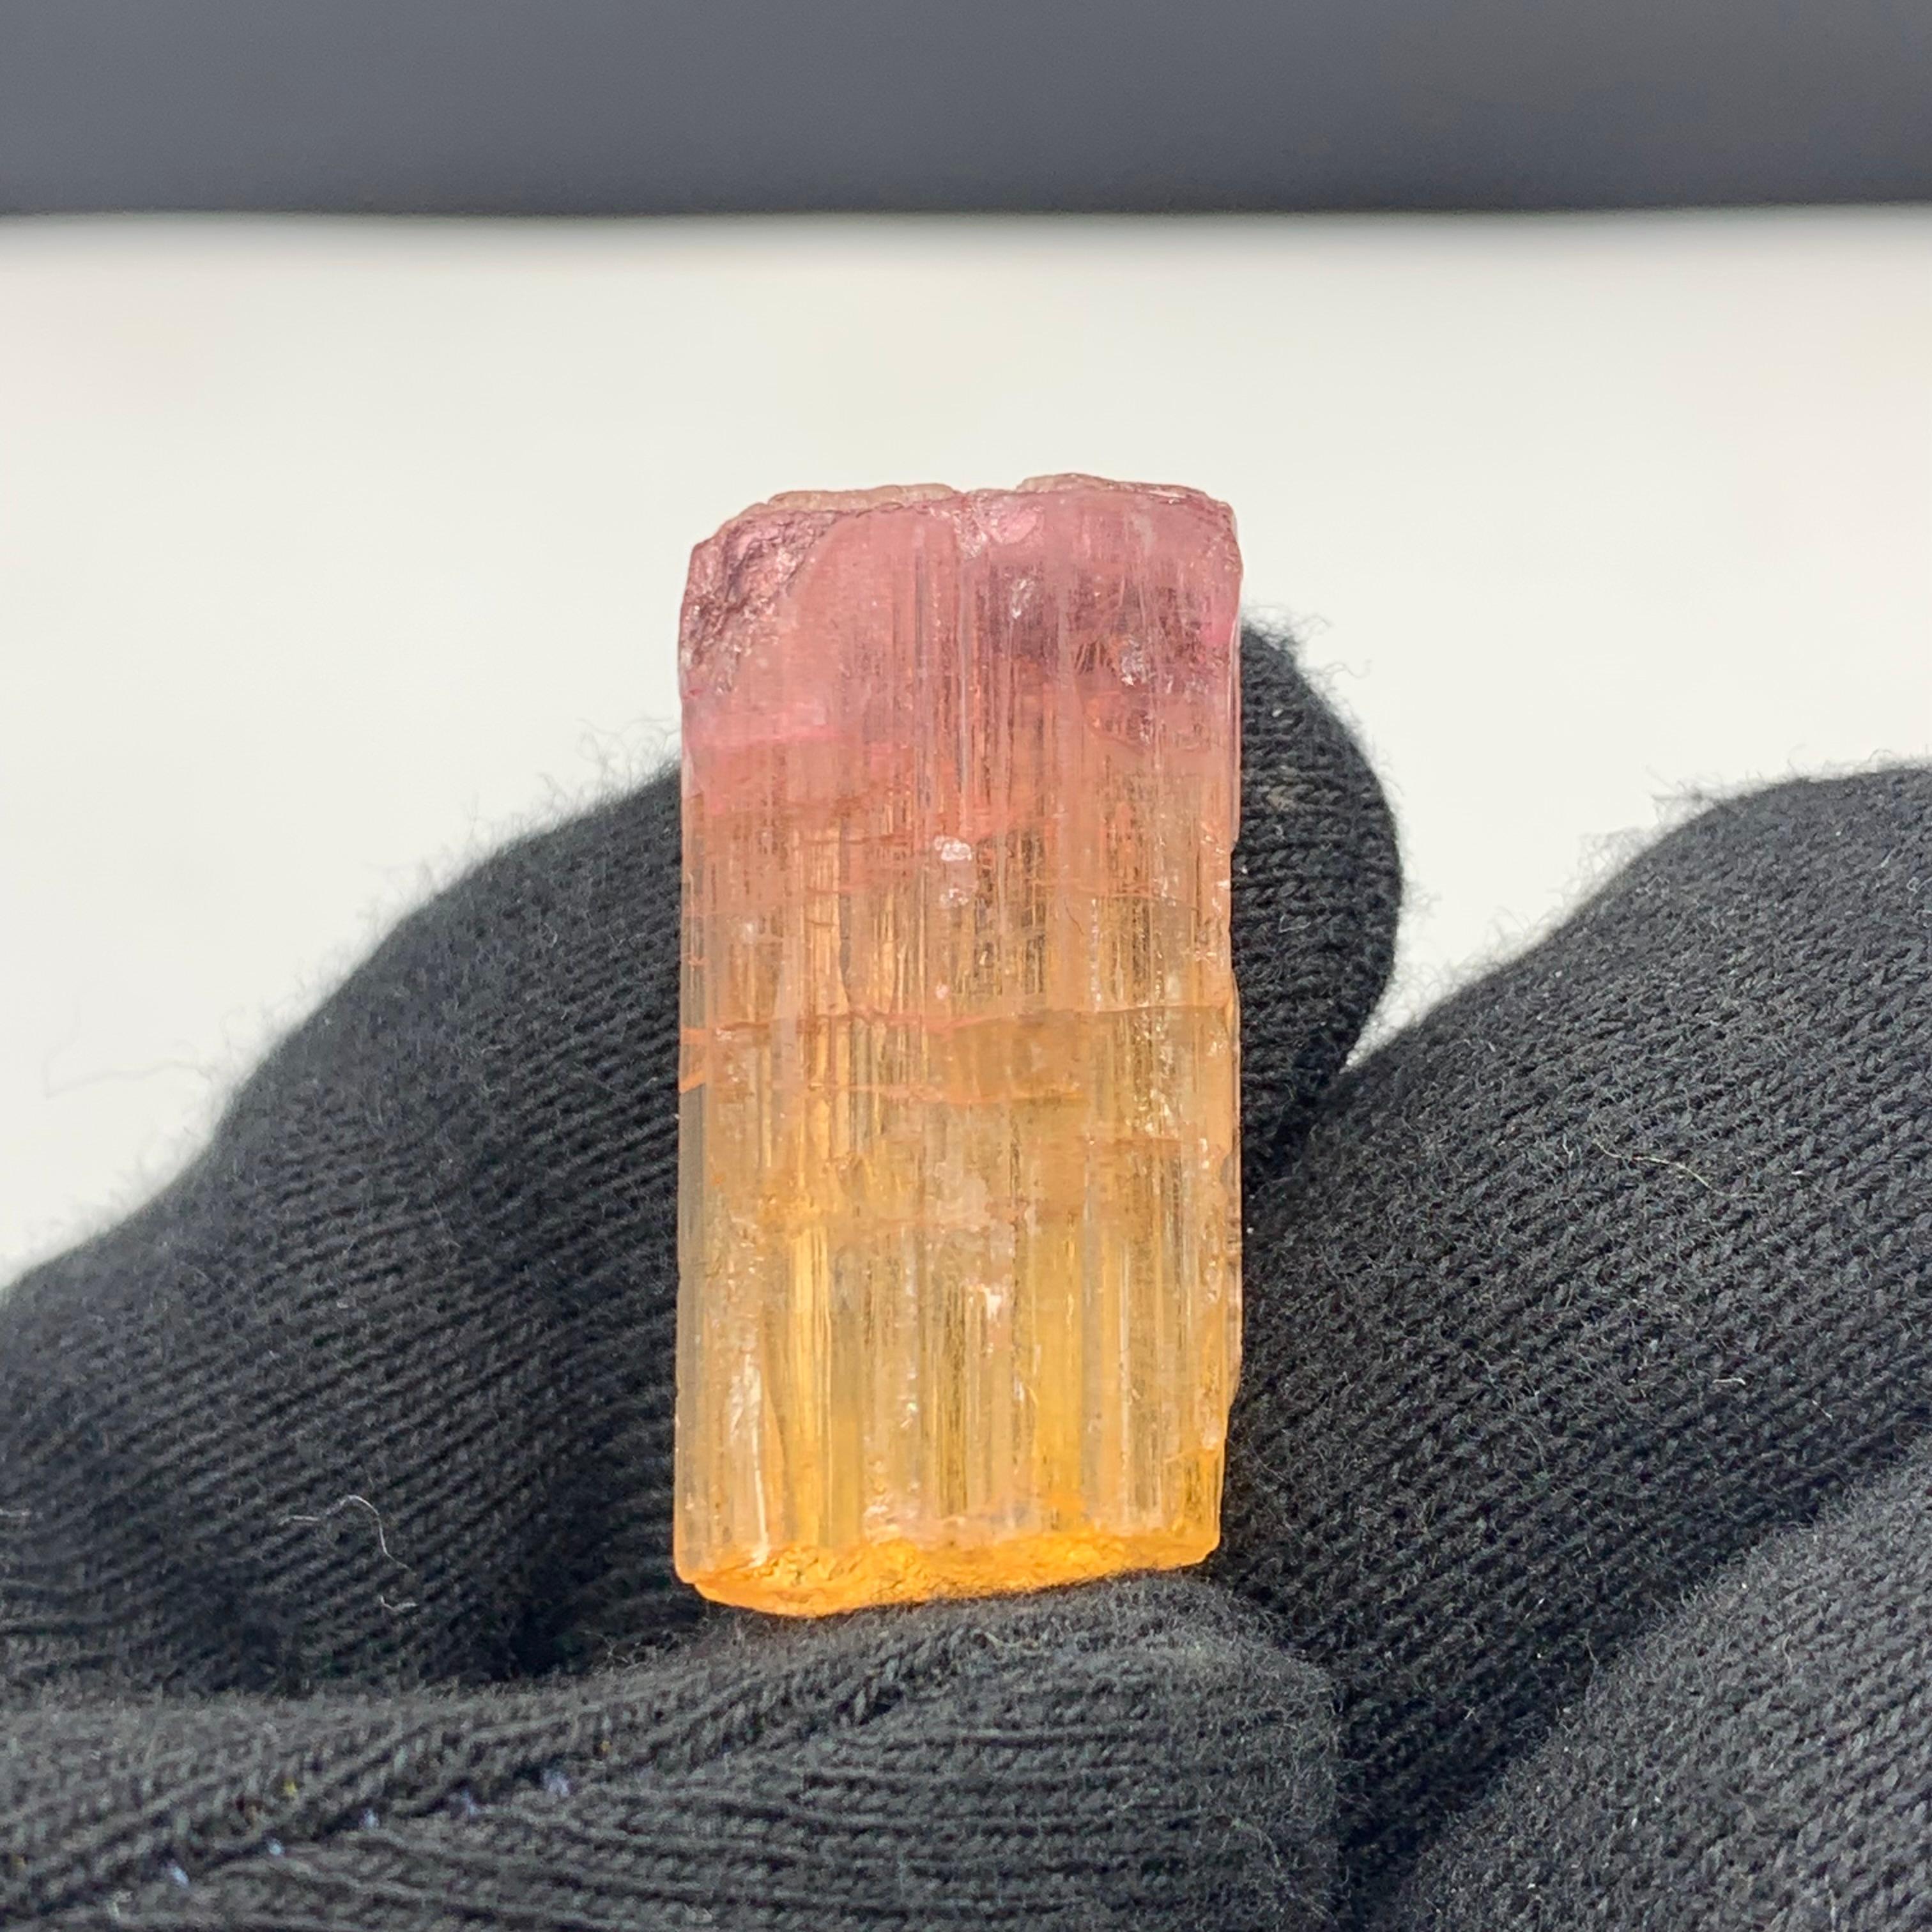 48 Carat Amazing Bi Color Tourmaline Crystal From Paprook Mine, Afghanistan For Sale 5